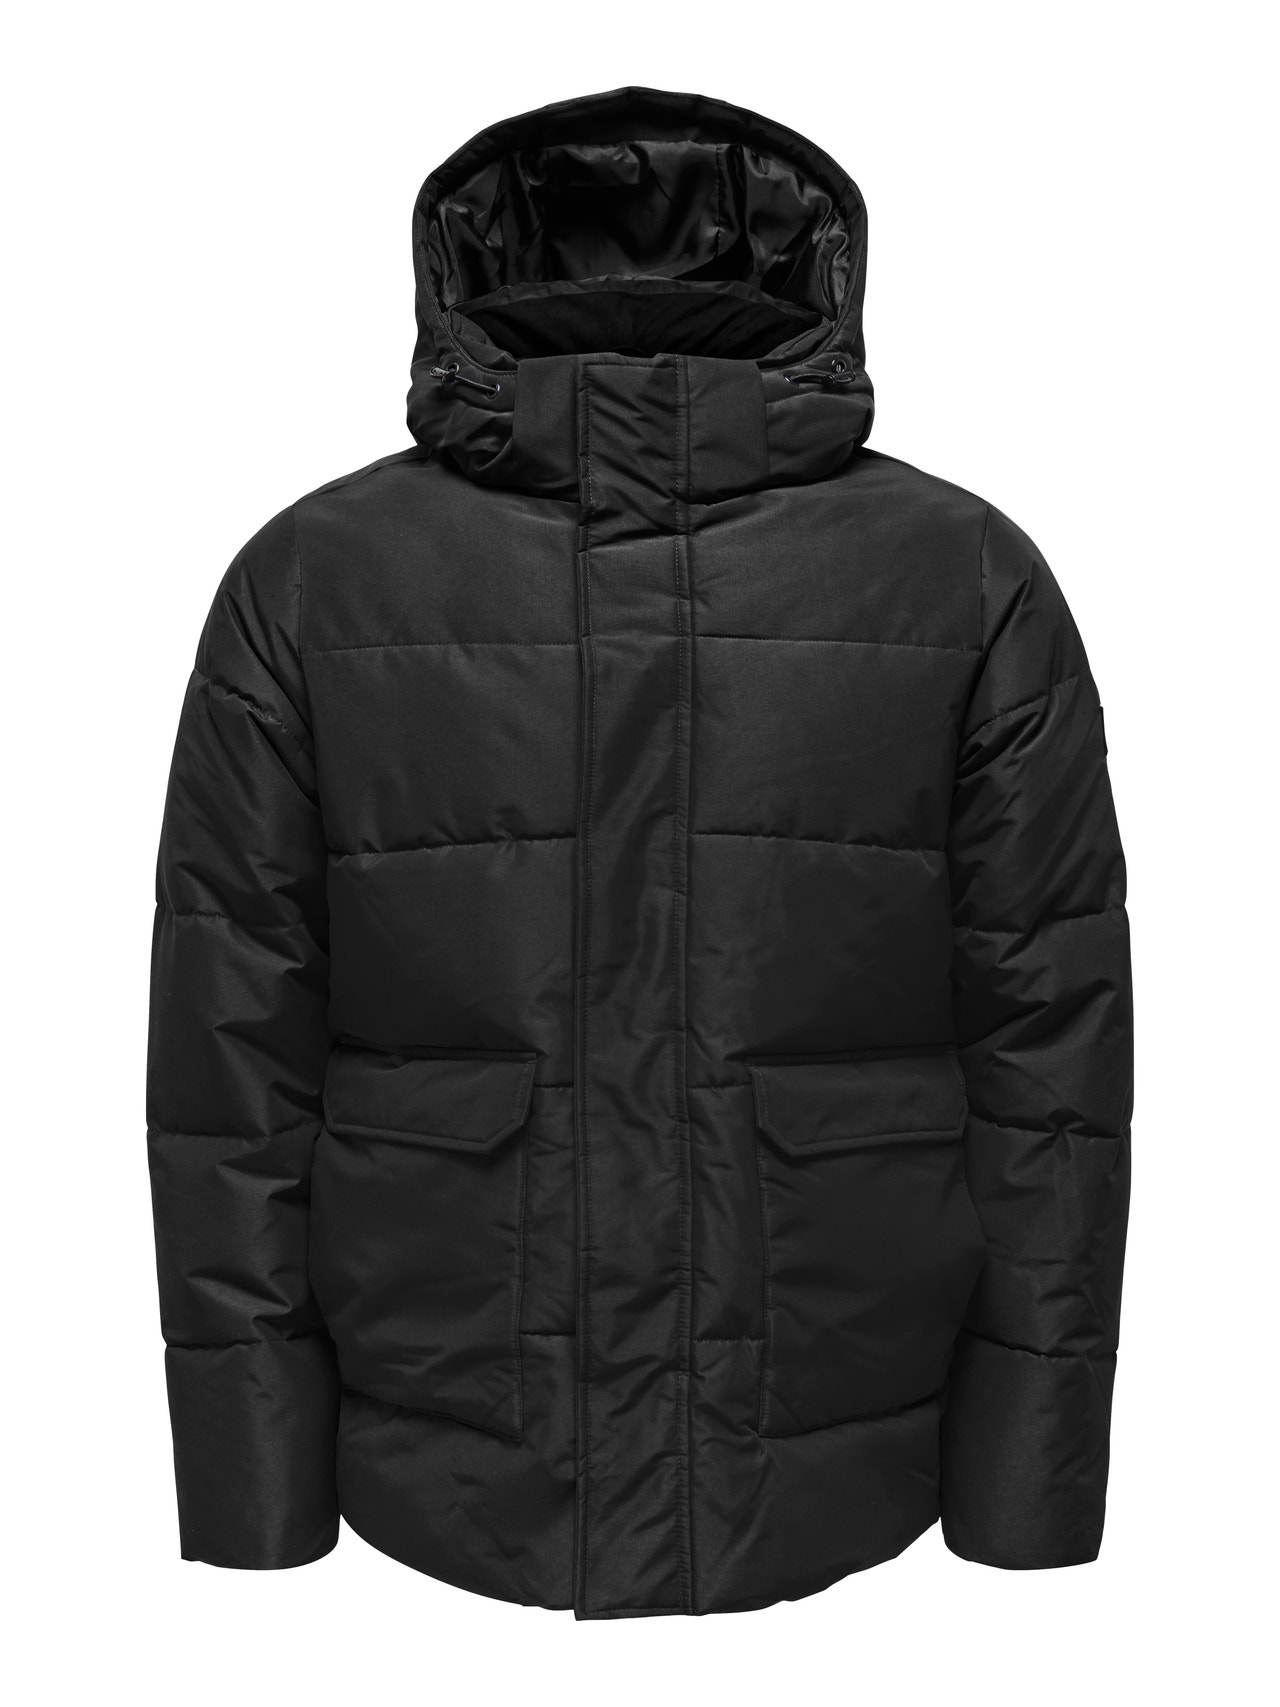 ONLY & SONS Short puffer jacket -Black - 22025825